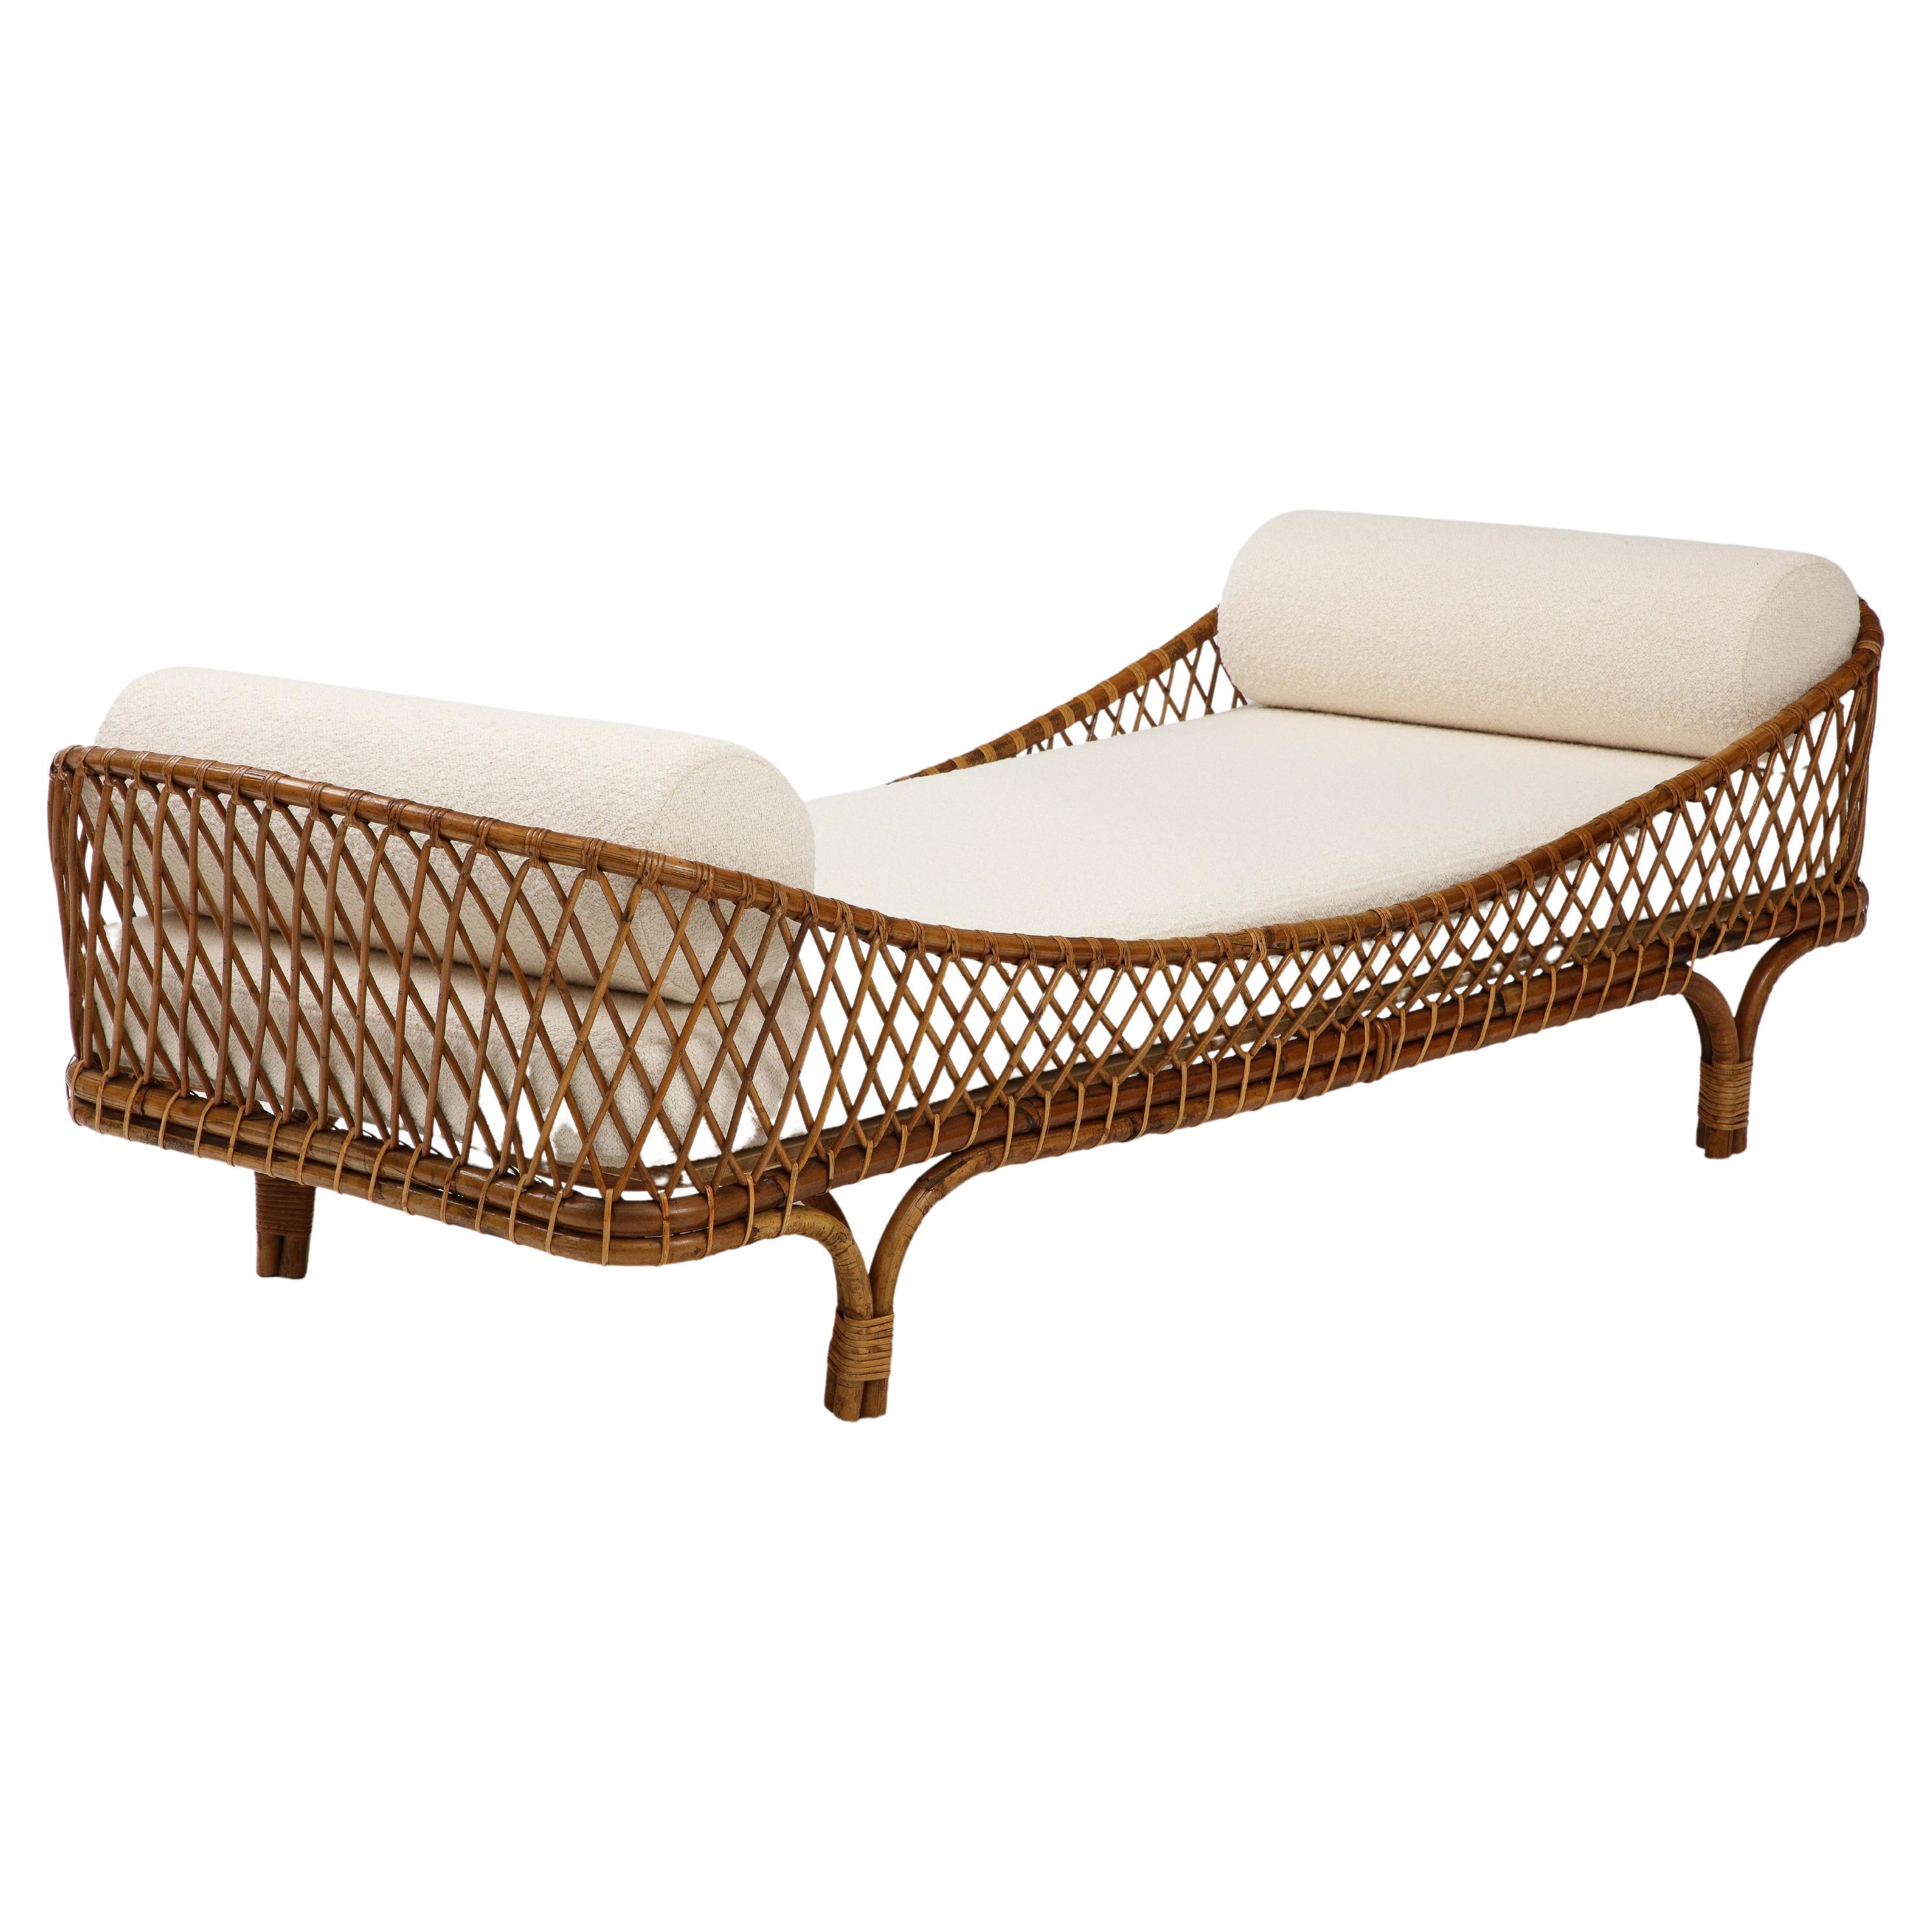 Rare Bonacina Rattan Daybed in Ivory Bouclé with Custom Mattress, Italy, 1960s For Sale